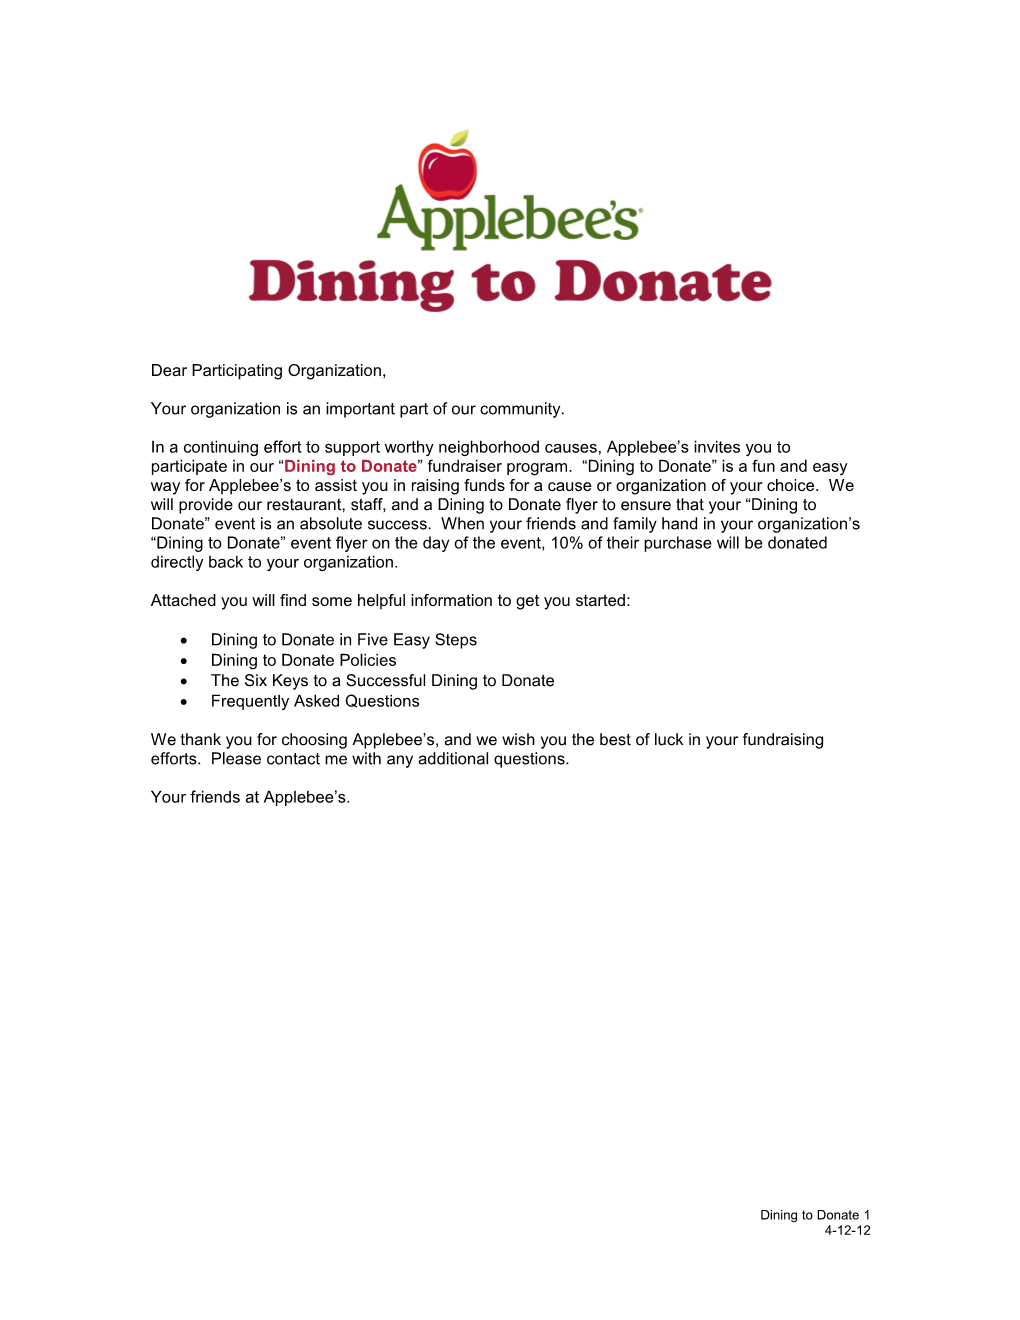 The Six Easy Steps of a Dining to Donate Program